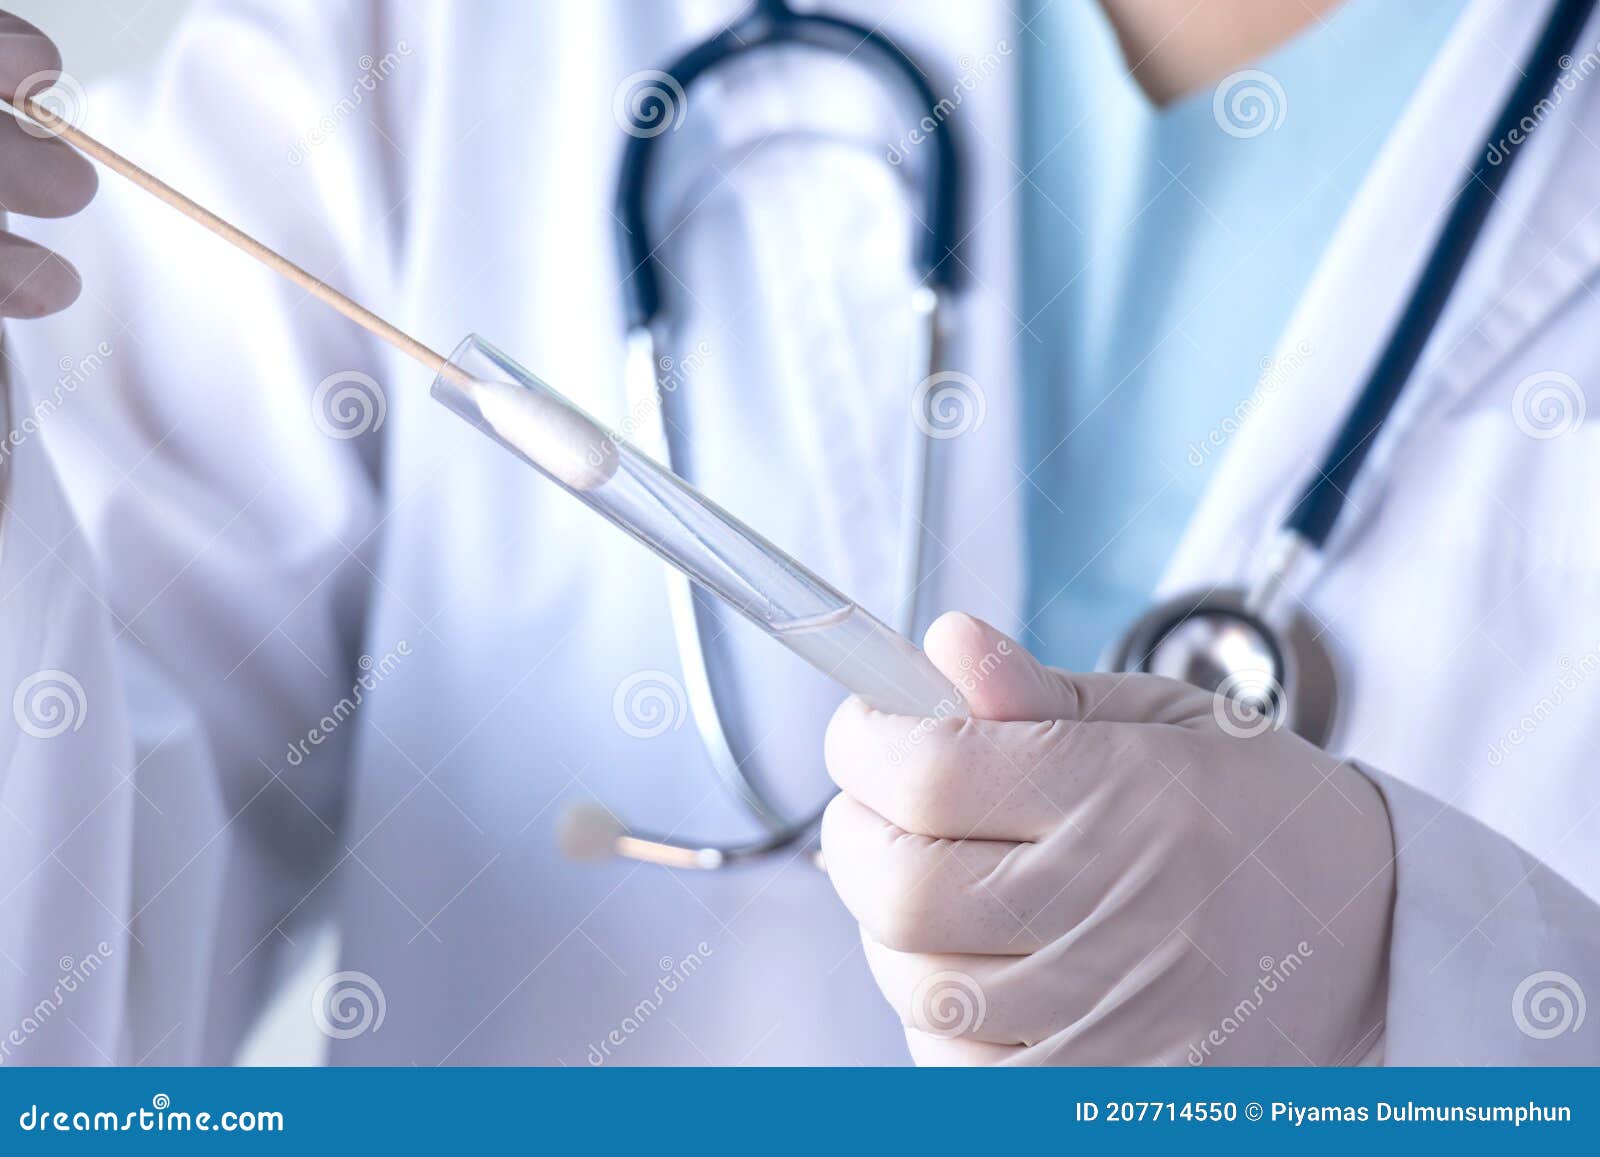 coronavirus covid-19 test concept. doctor hand with glove holding test tube with patient nasal secretion cotton swab sample